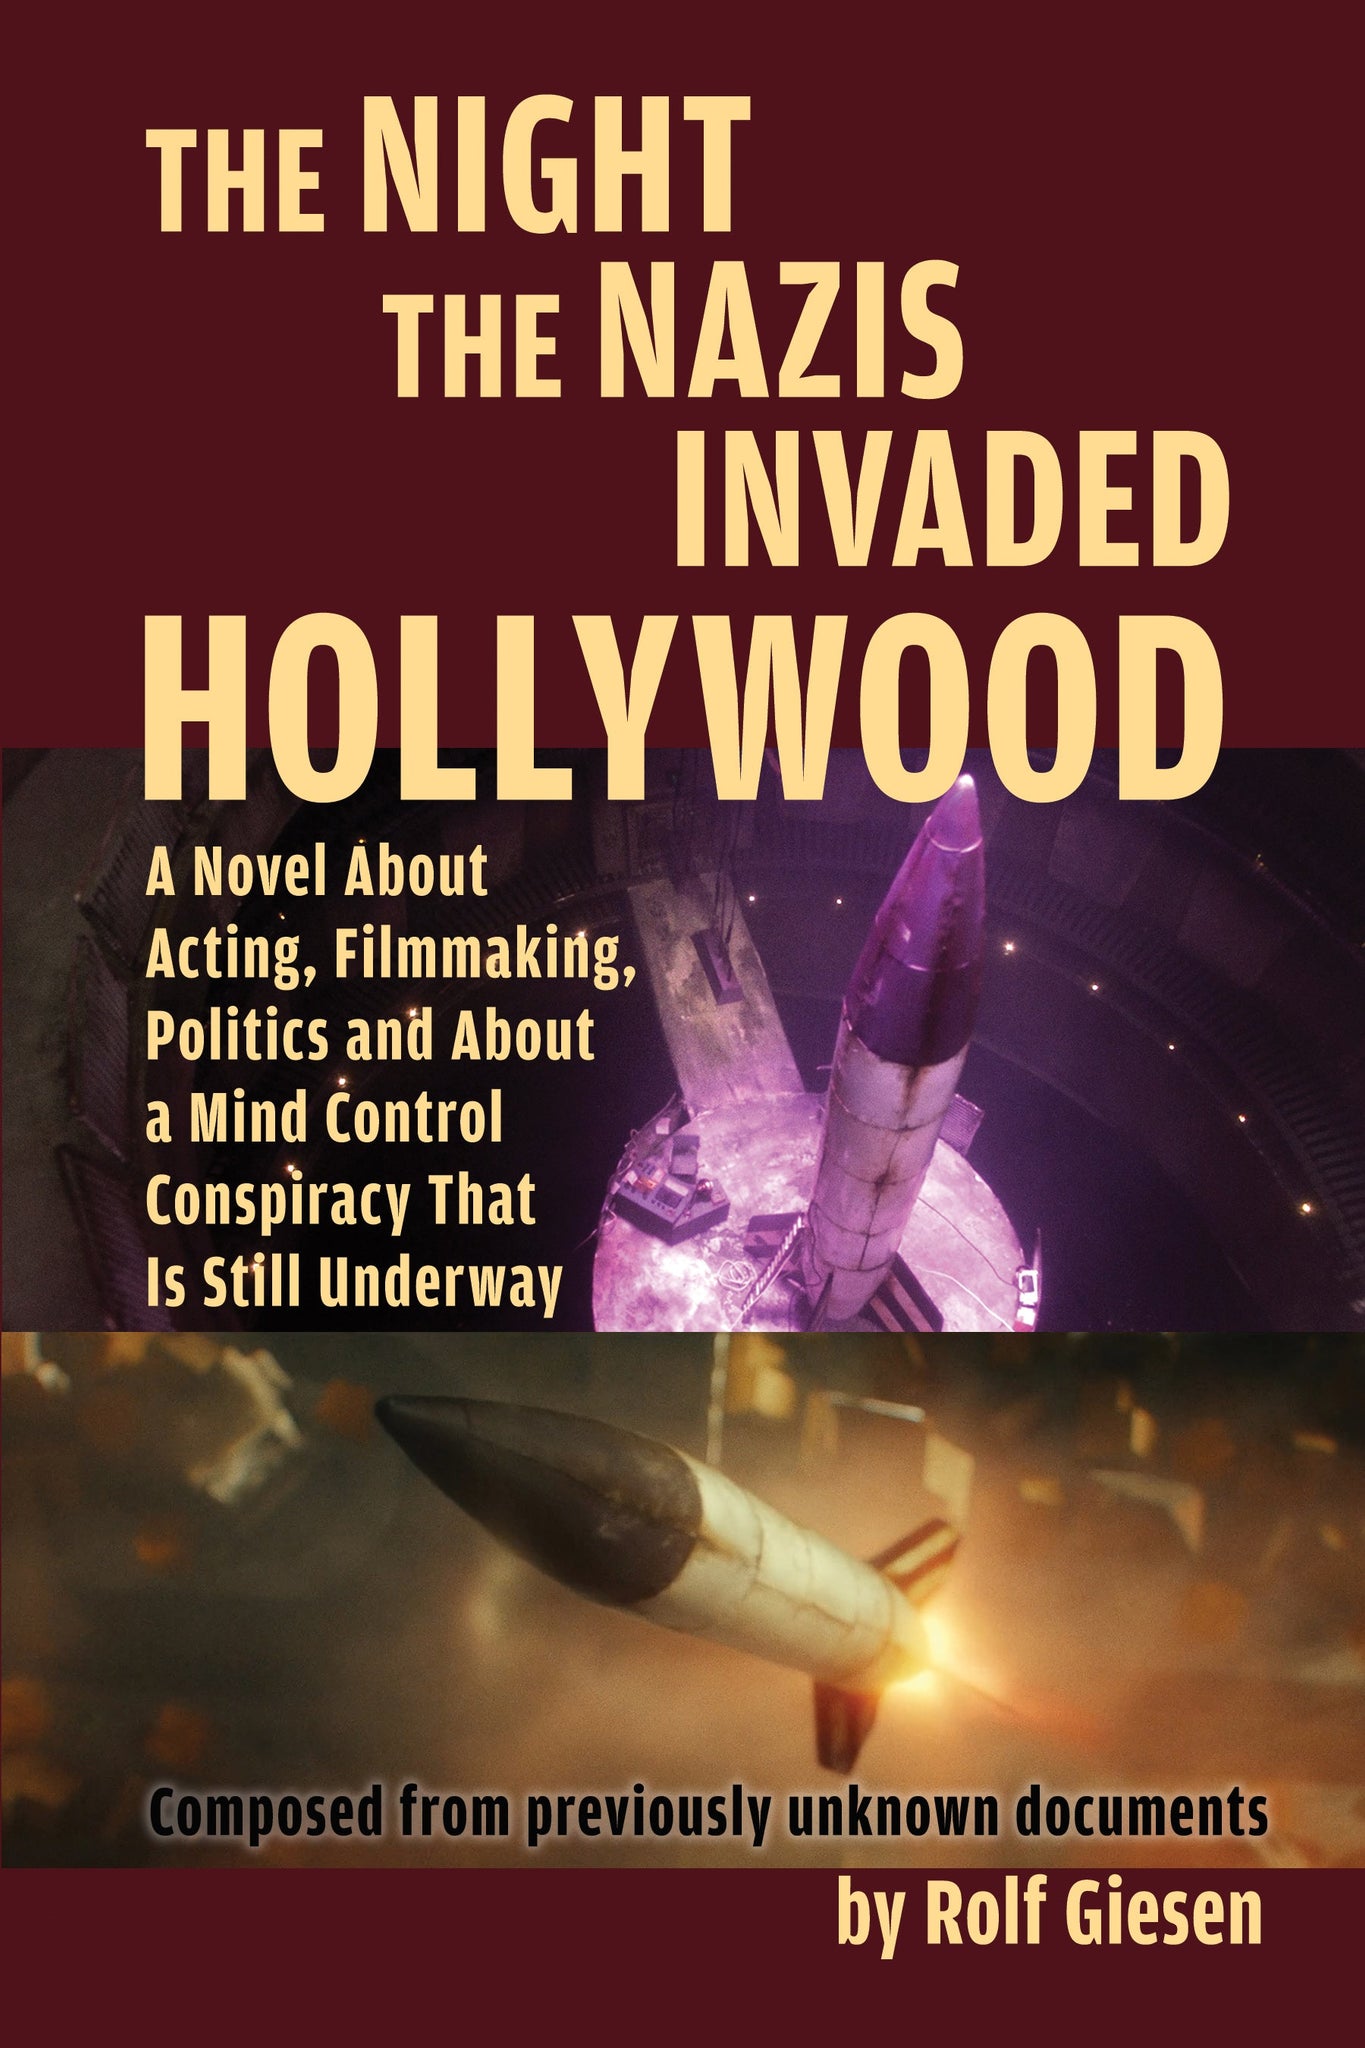 The Night the Nazis Invaded Hollywood (paperback)